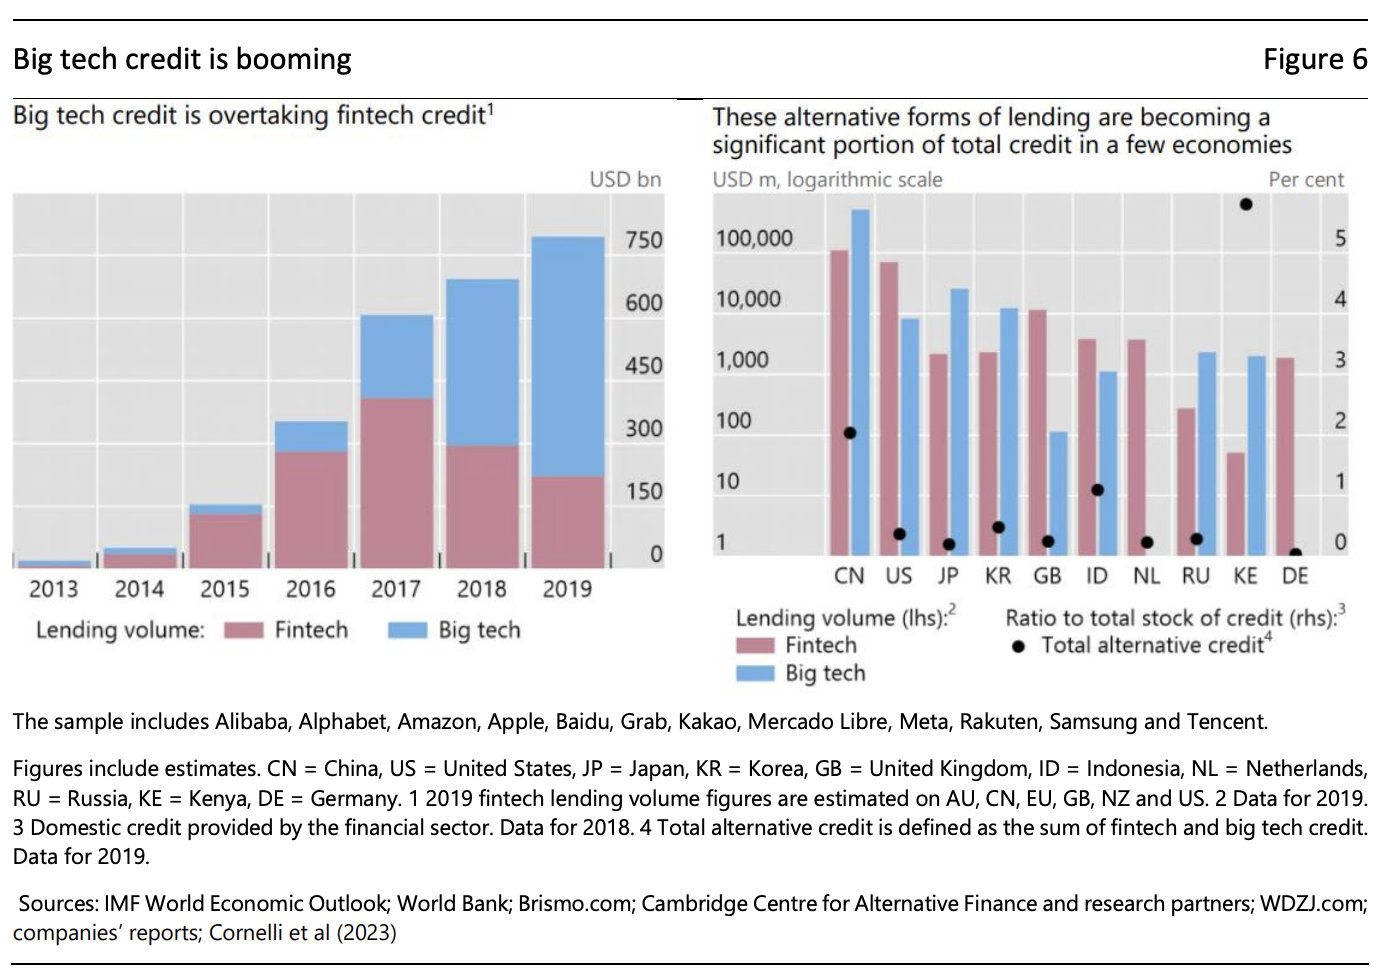 The growth of bigtech credit globally, Source: Bigtechs in finance, Bank for International Settlements, Oct 2023